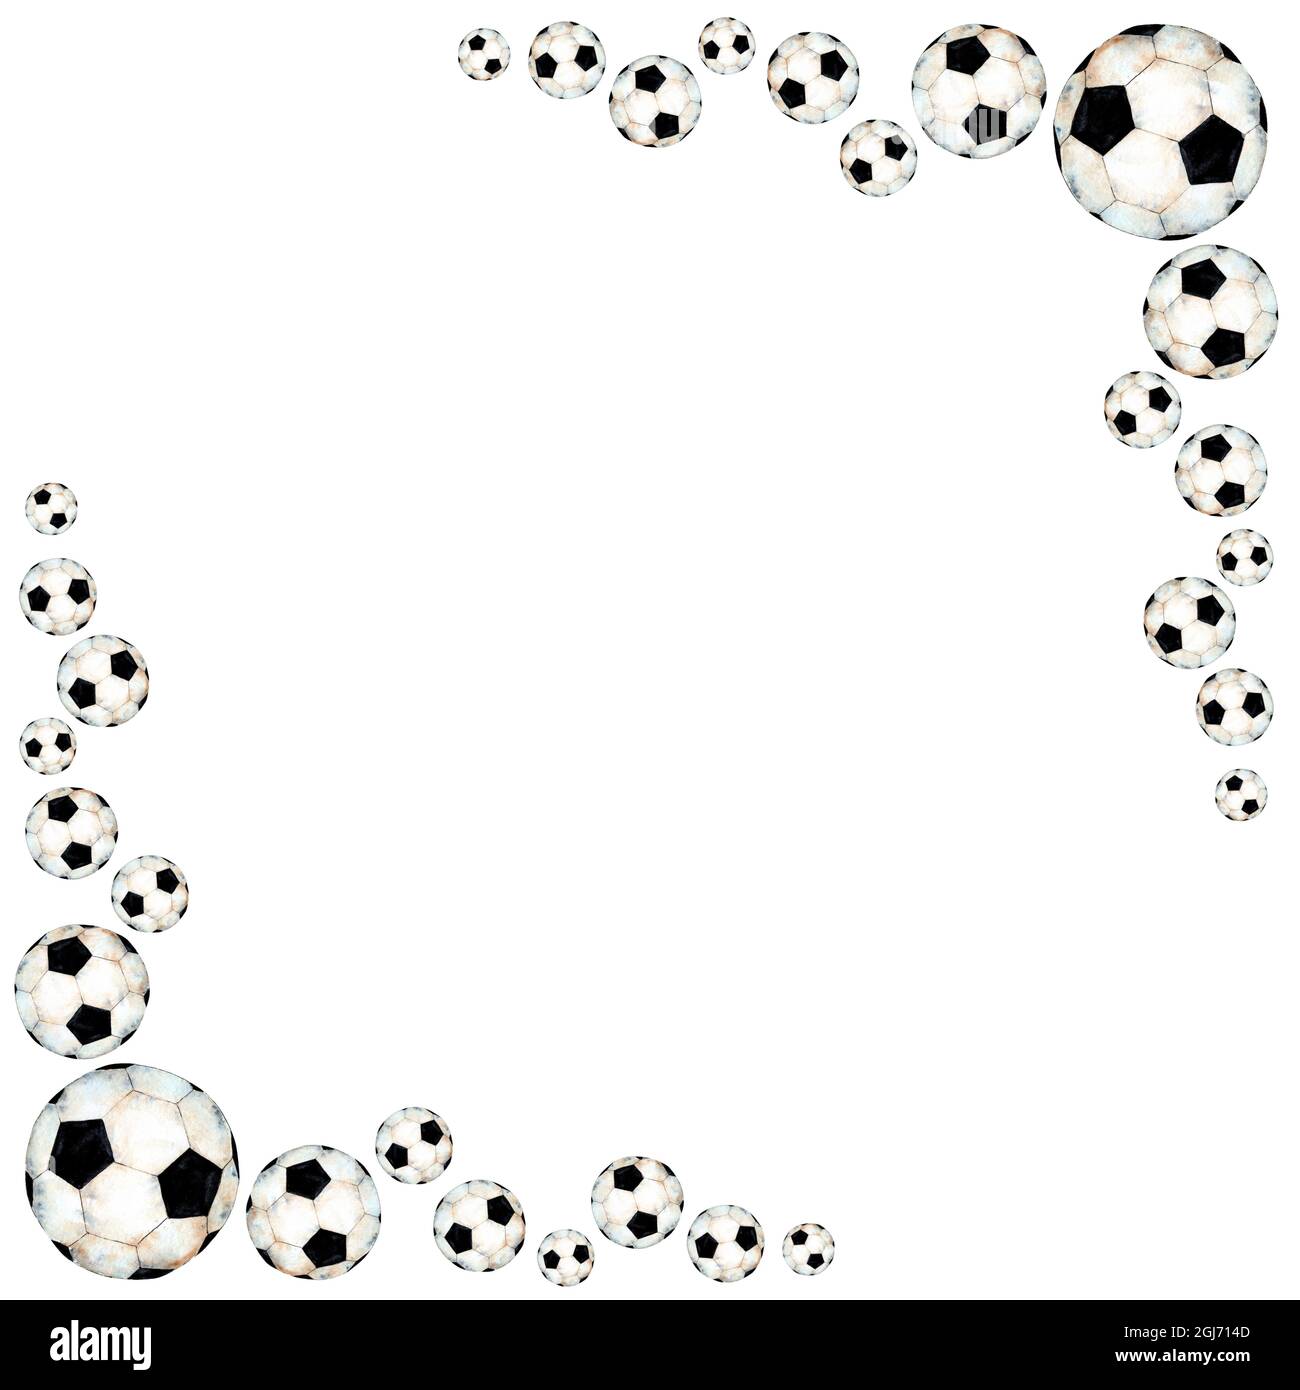 Watercolor soccer sport frame decorated with ball. Corner frame. Sports  equipment, black and white ball. Isolated over white background. Drawn by  hand Stock Photo - Alamy